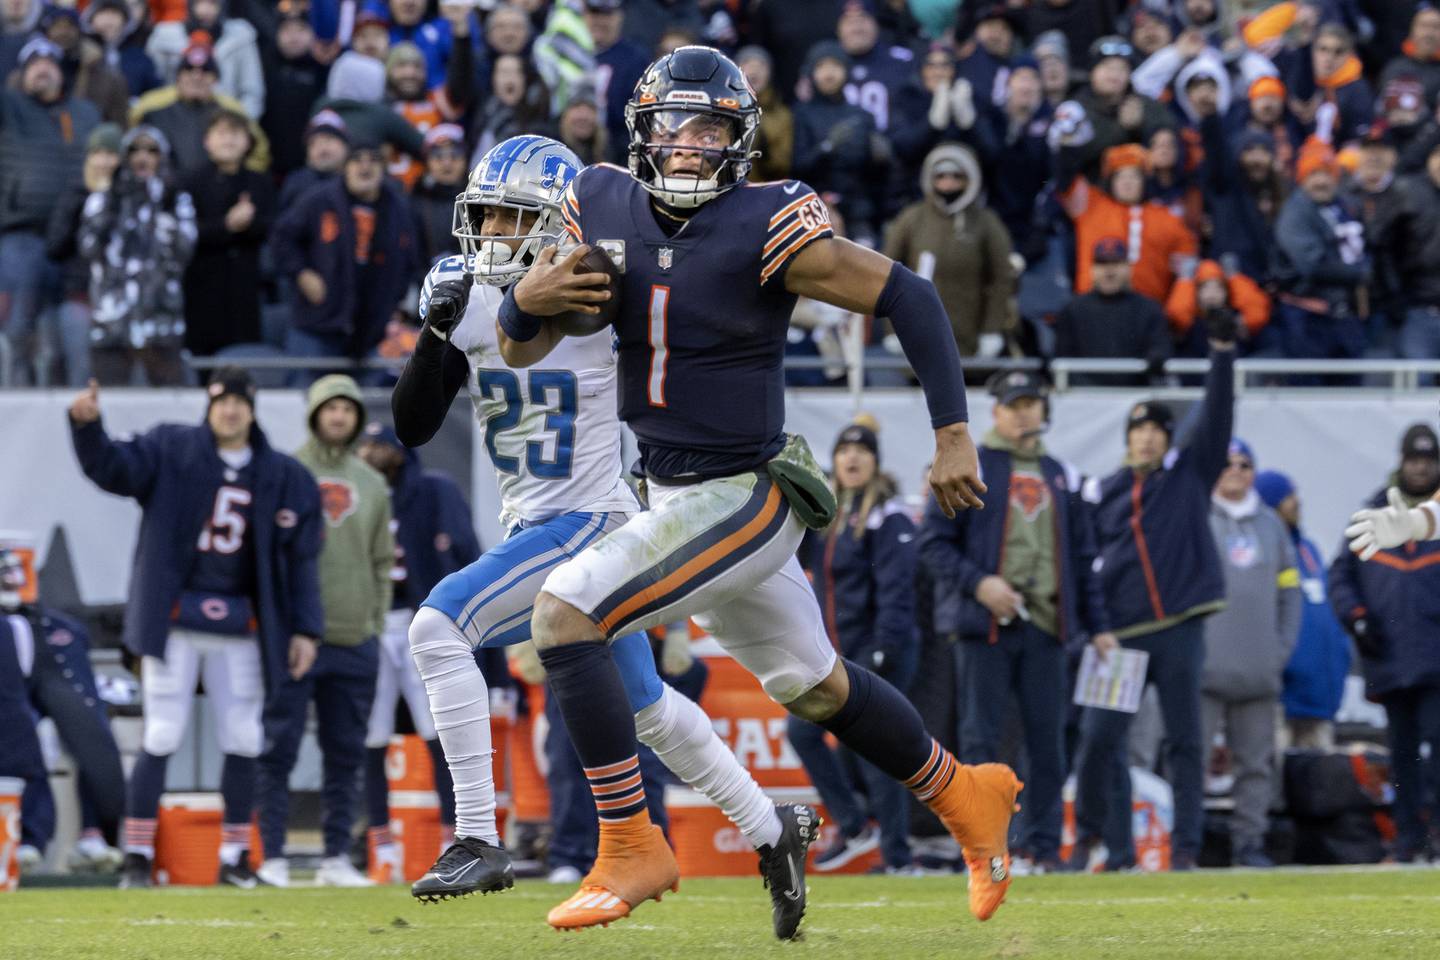 Bears quarterback Justin Fields (1) runs in a 67-yard touchdown during the fourth quarter on Nov. 13, 2022, at Soldier Field.